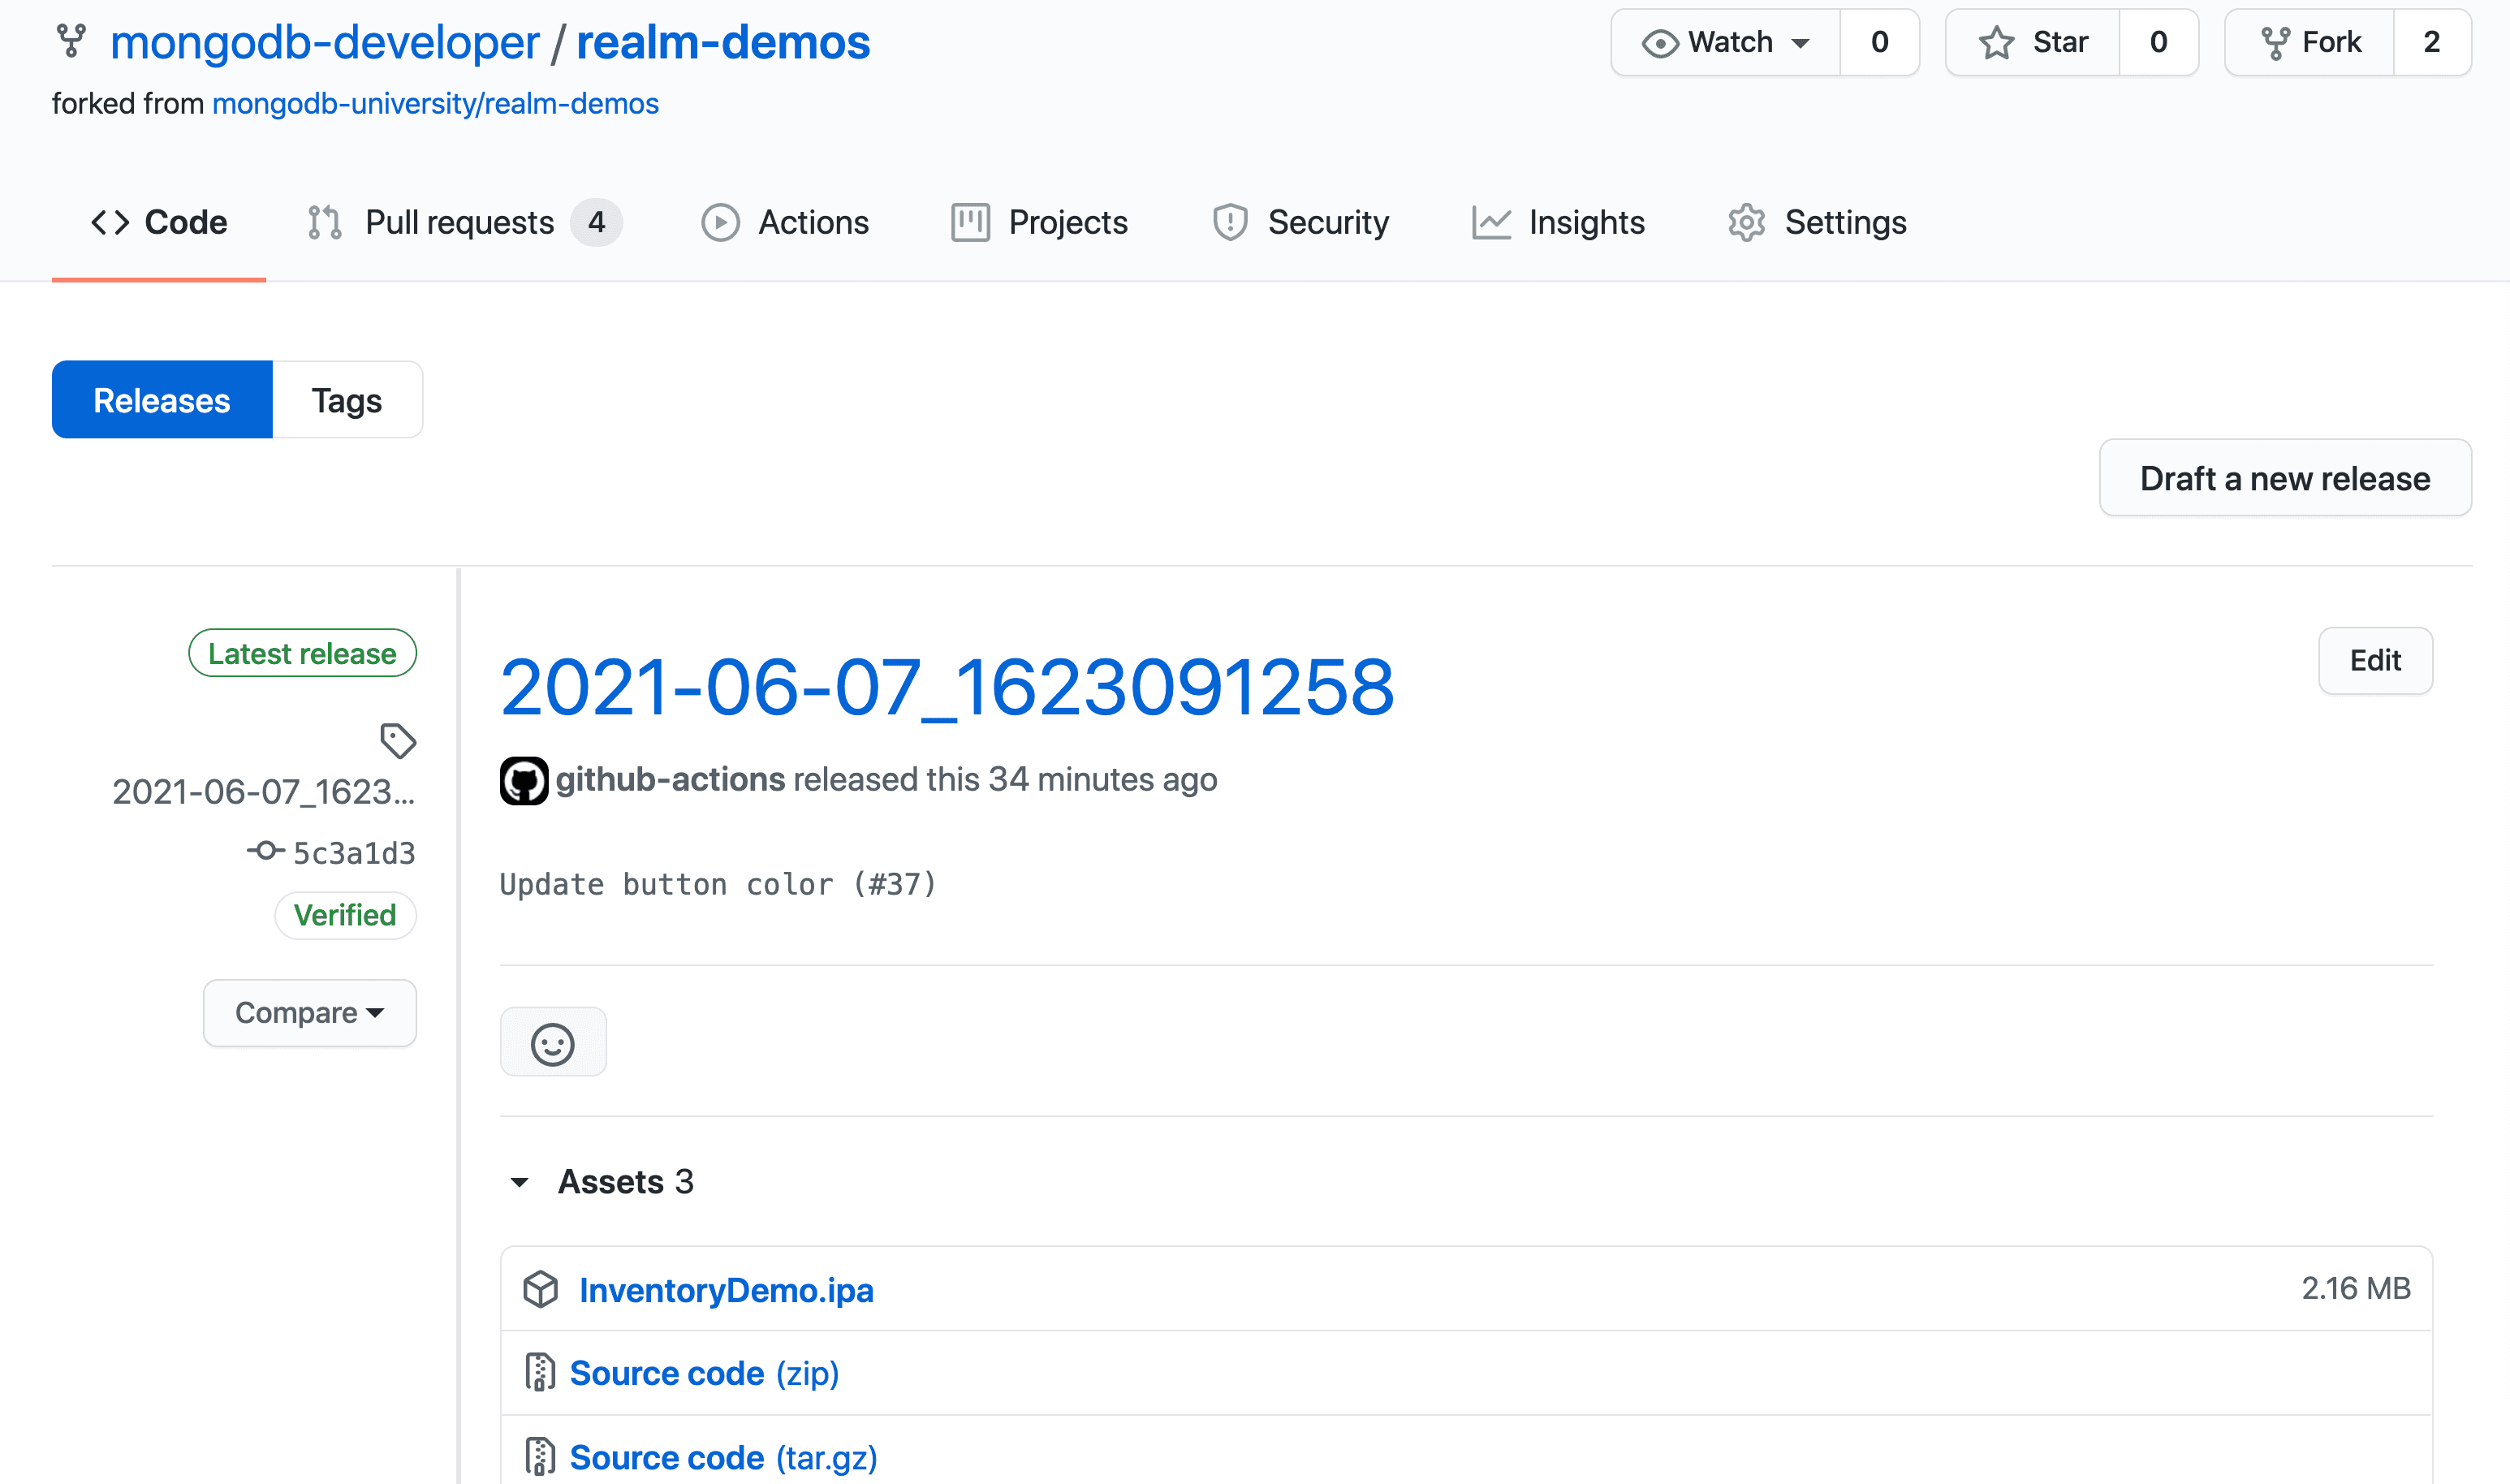 Screenshot of a GitHub release that contains a mobile app archive